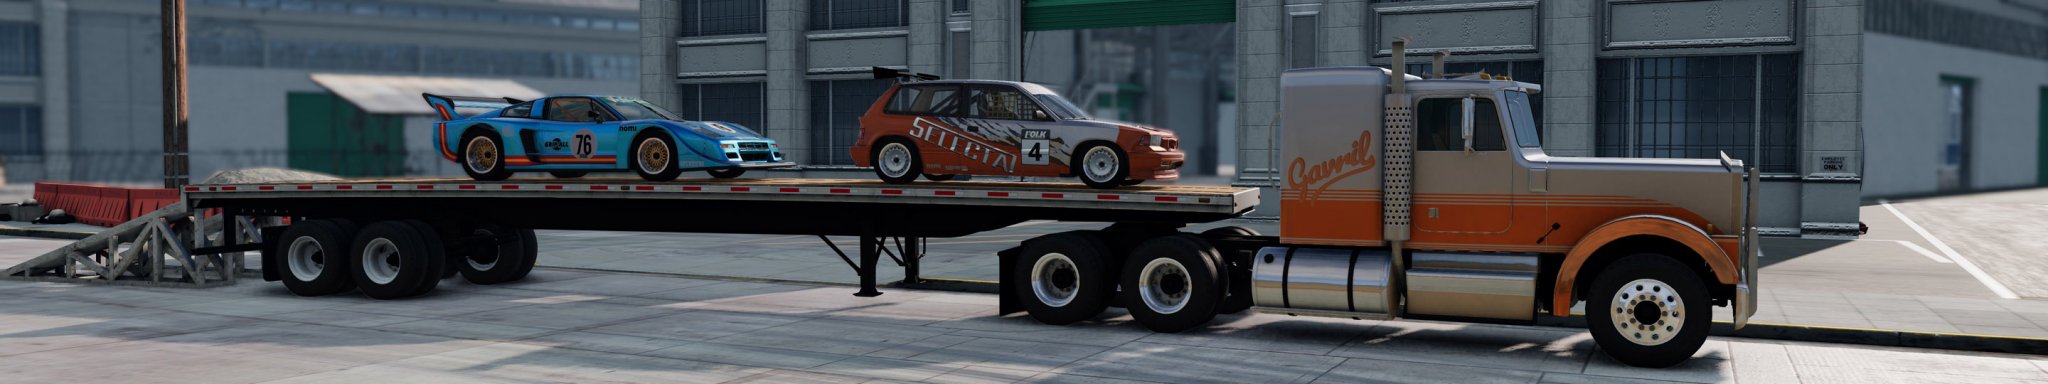 0 BeamNG RACE CAR and TRUCK TRANSPORTER copy.jpg